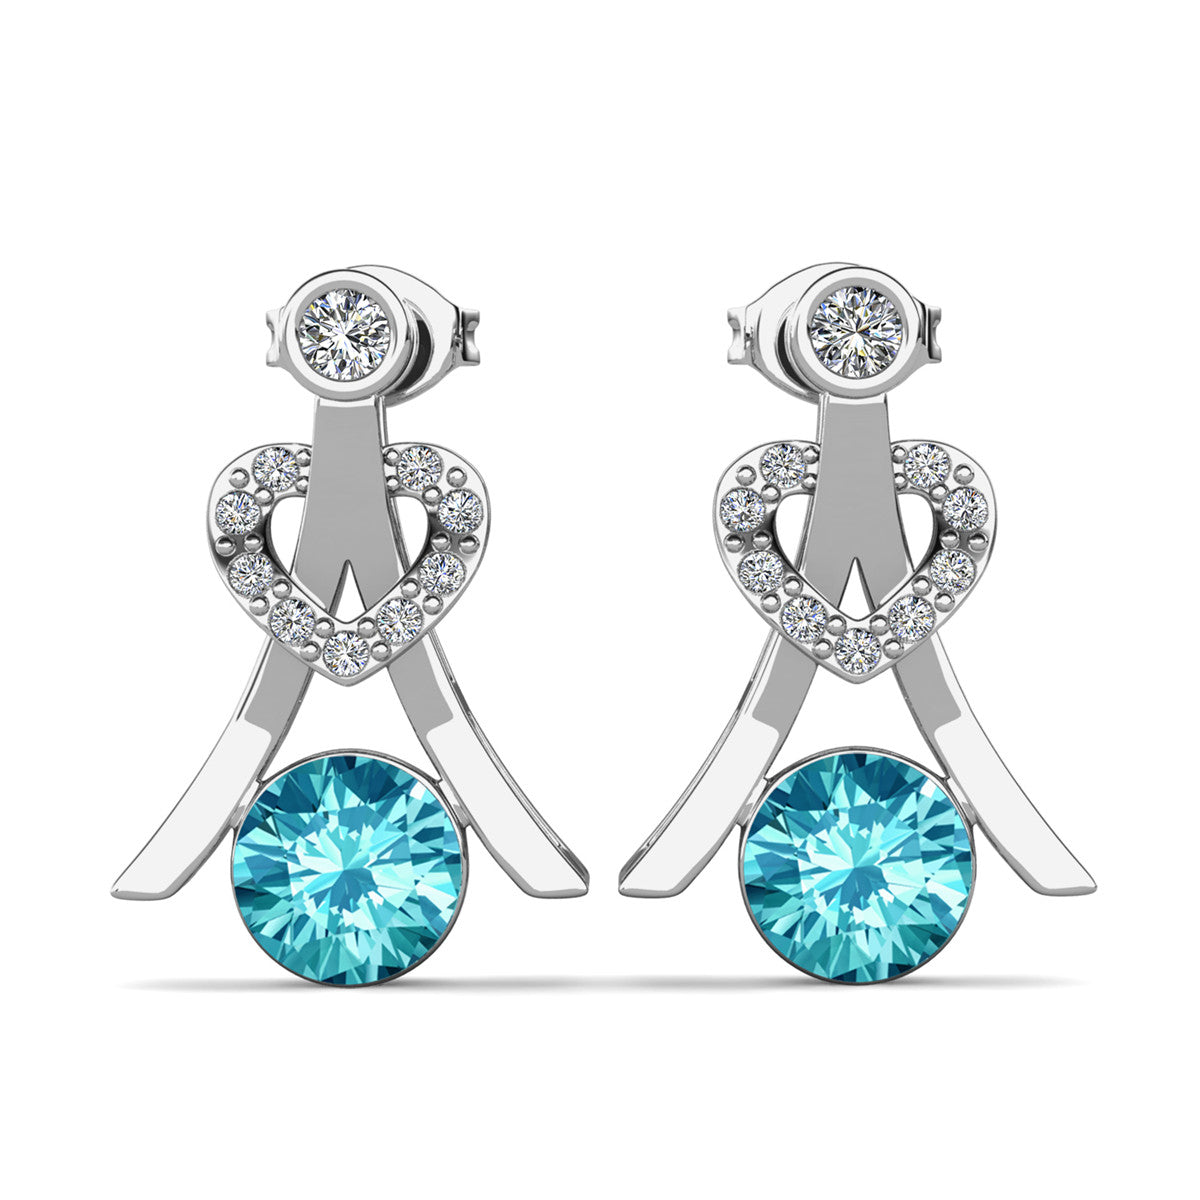 Serenity March Birthstone Aquamarine Earrings,  18k White Gold Plated Silver Earrings with Round Cut Crystals